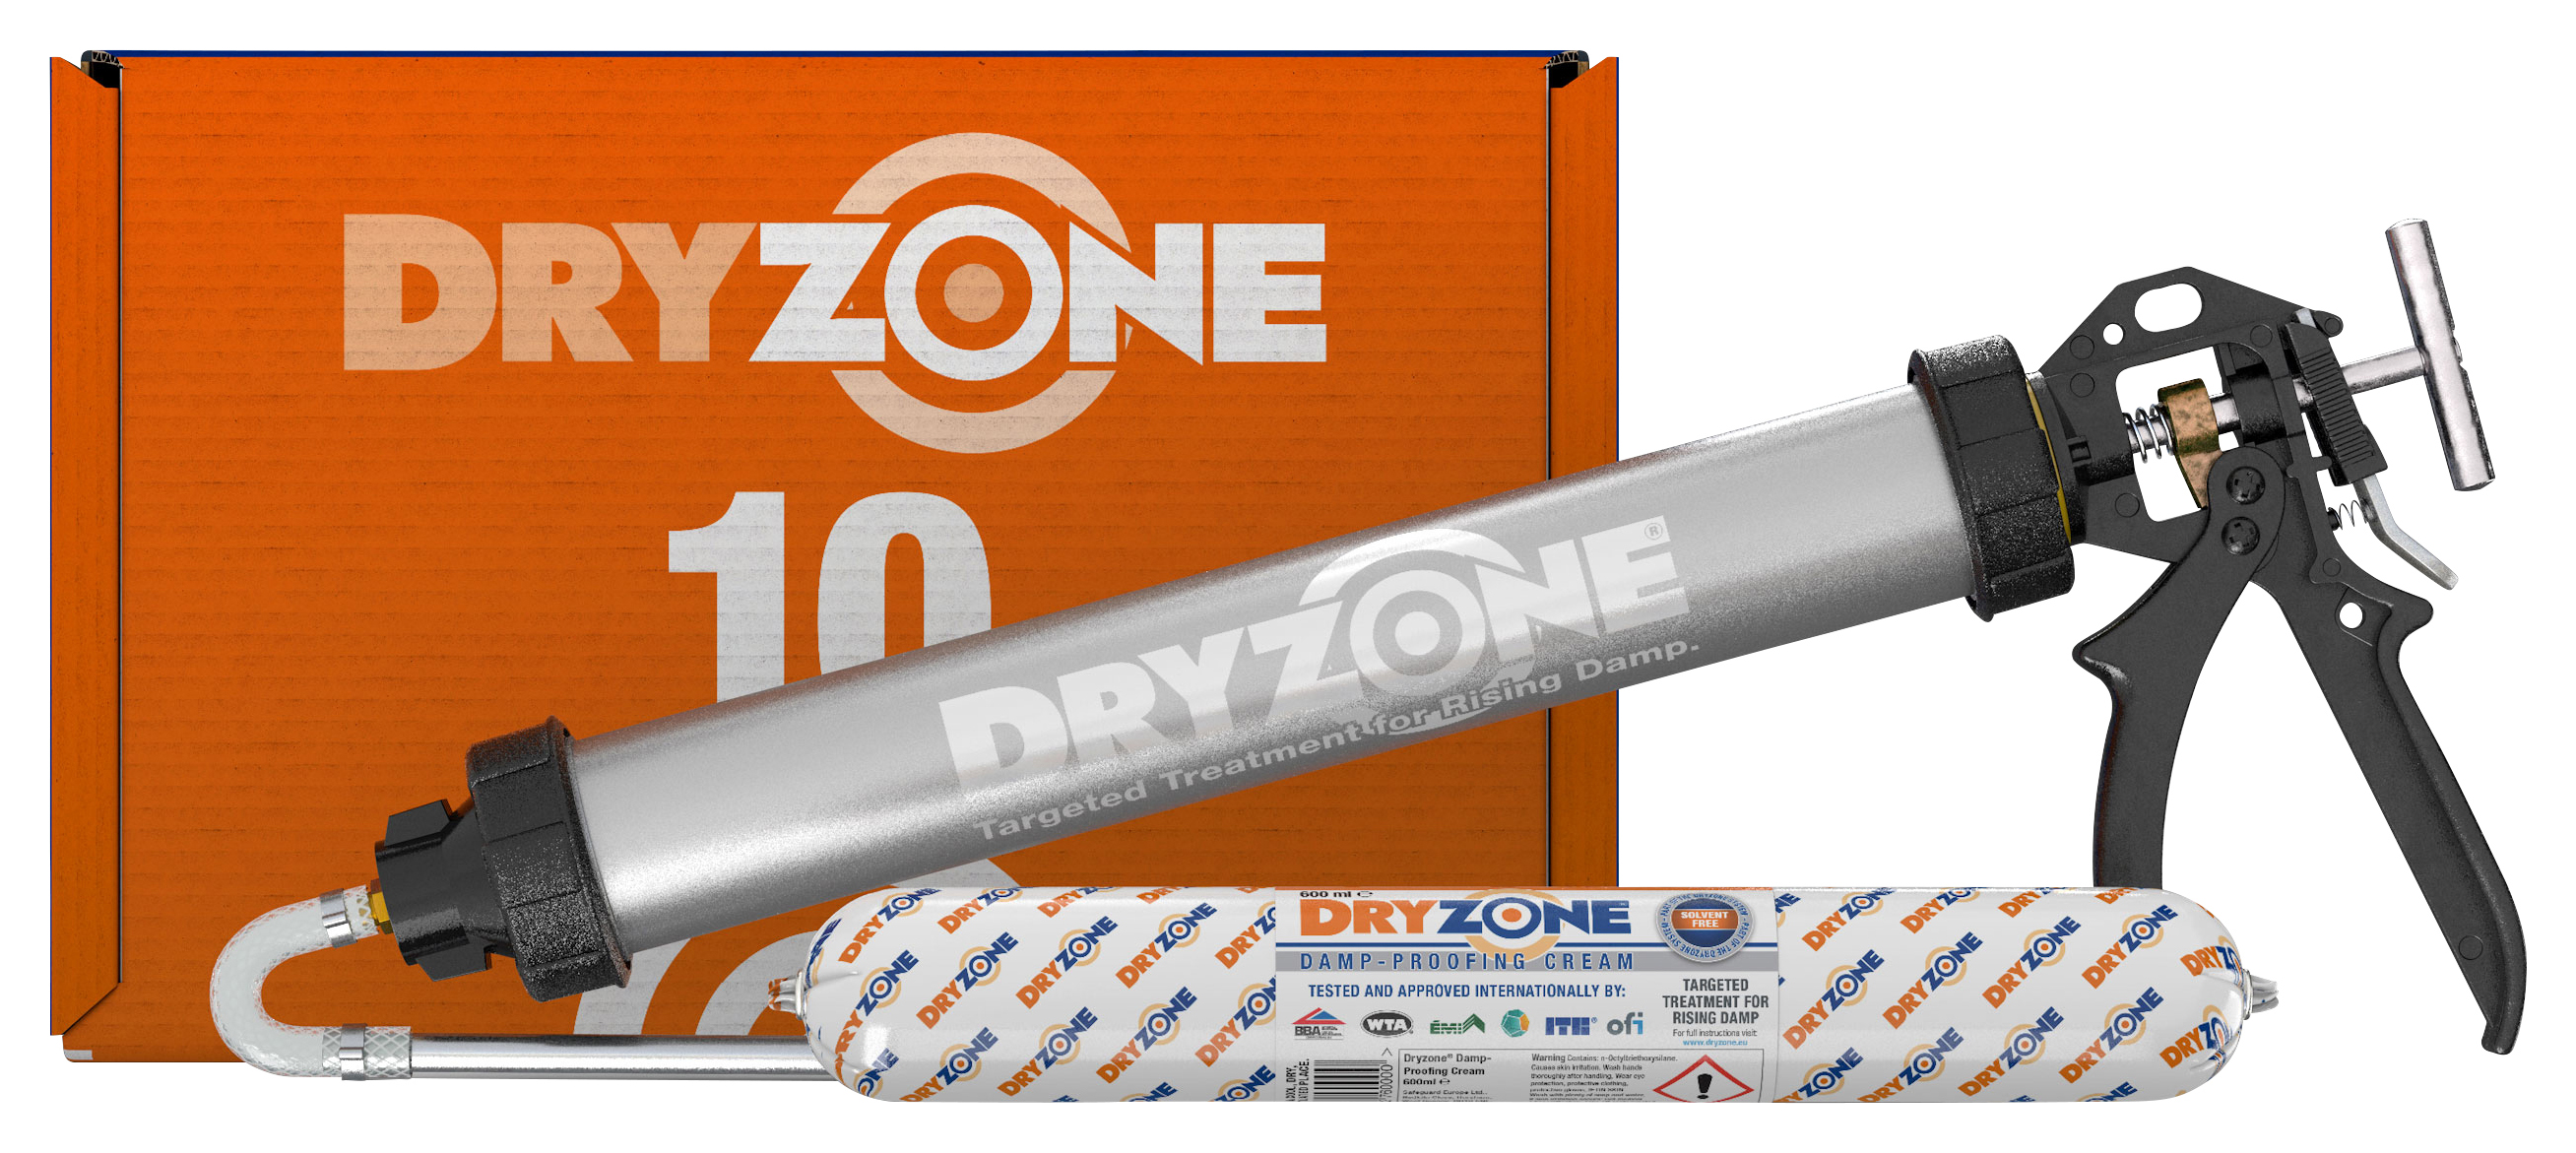 Dryzone Damp Proof Course Cream Foil Cartridge Kit - 600ml - Pack of 10